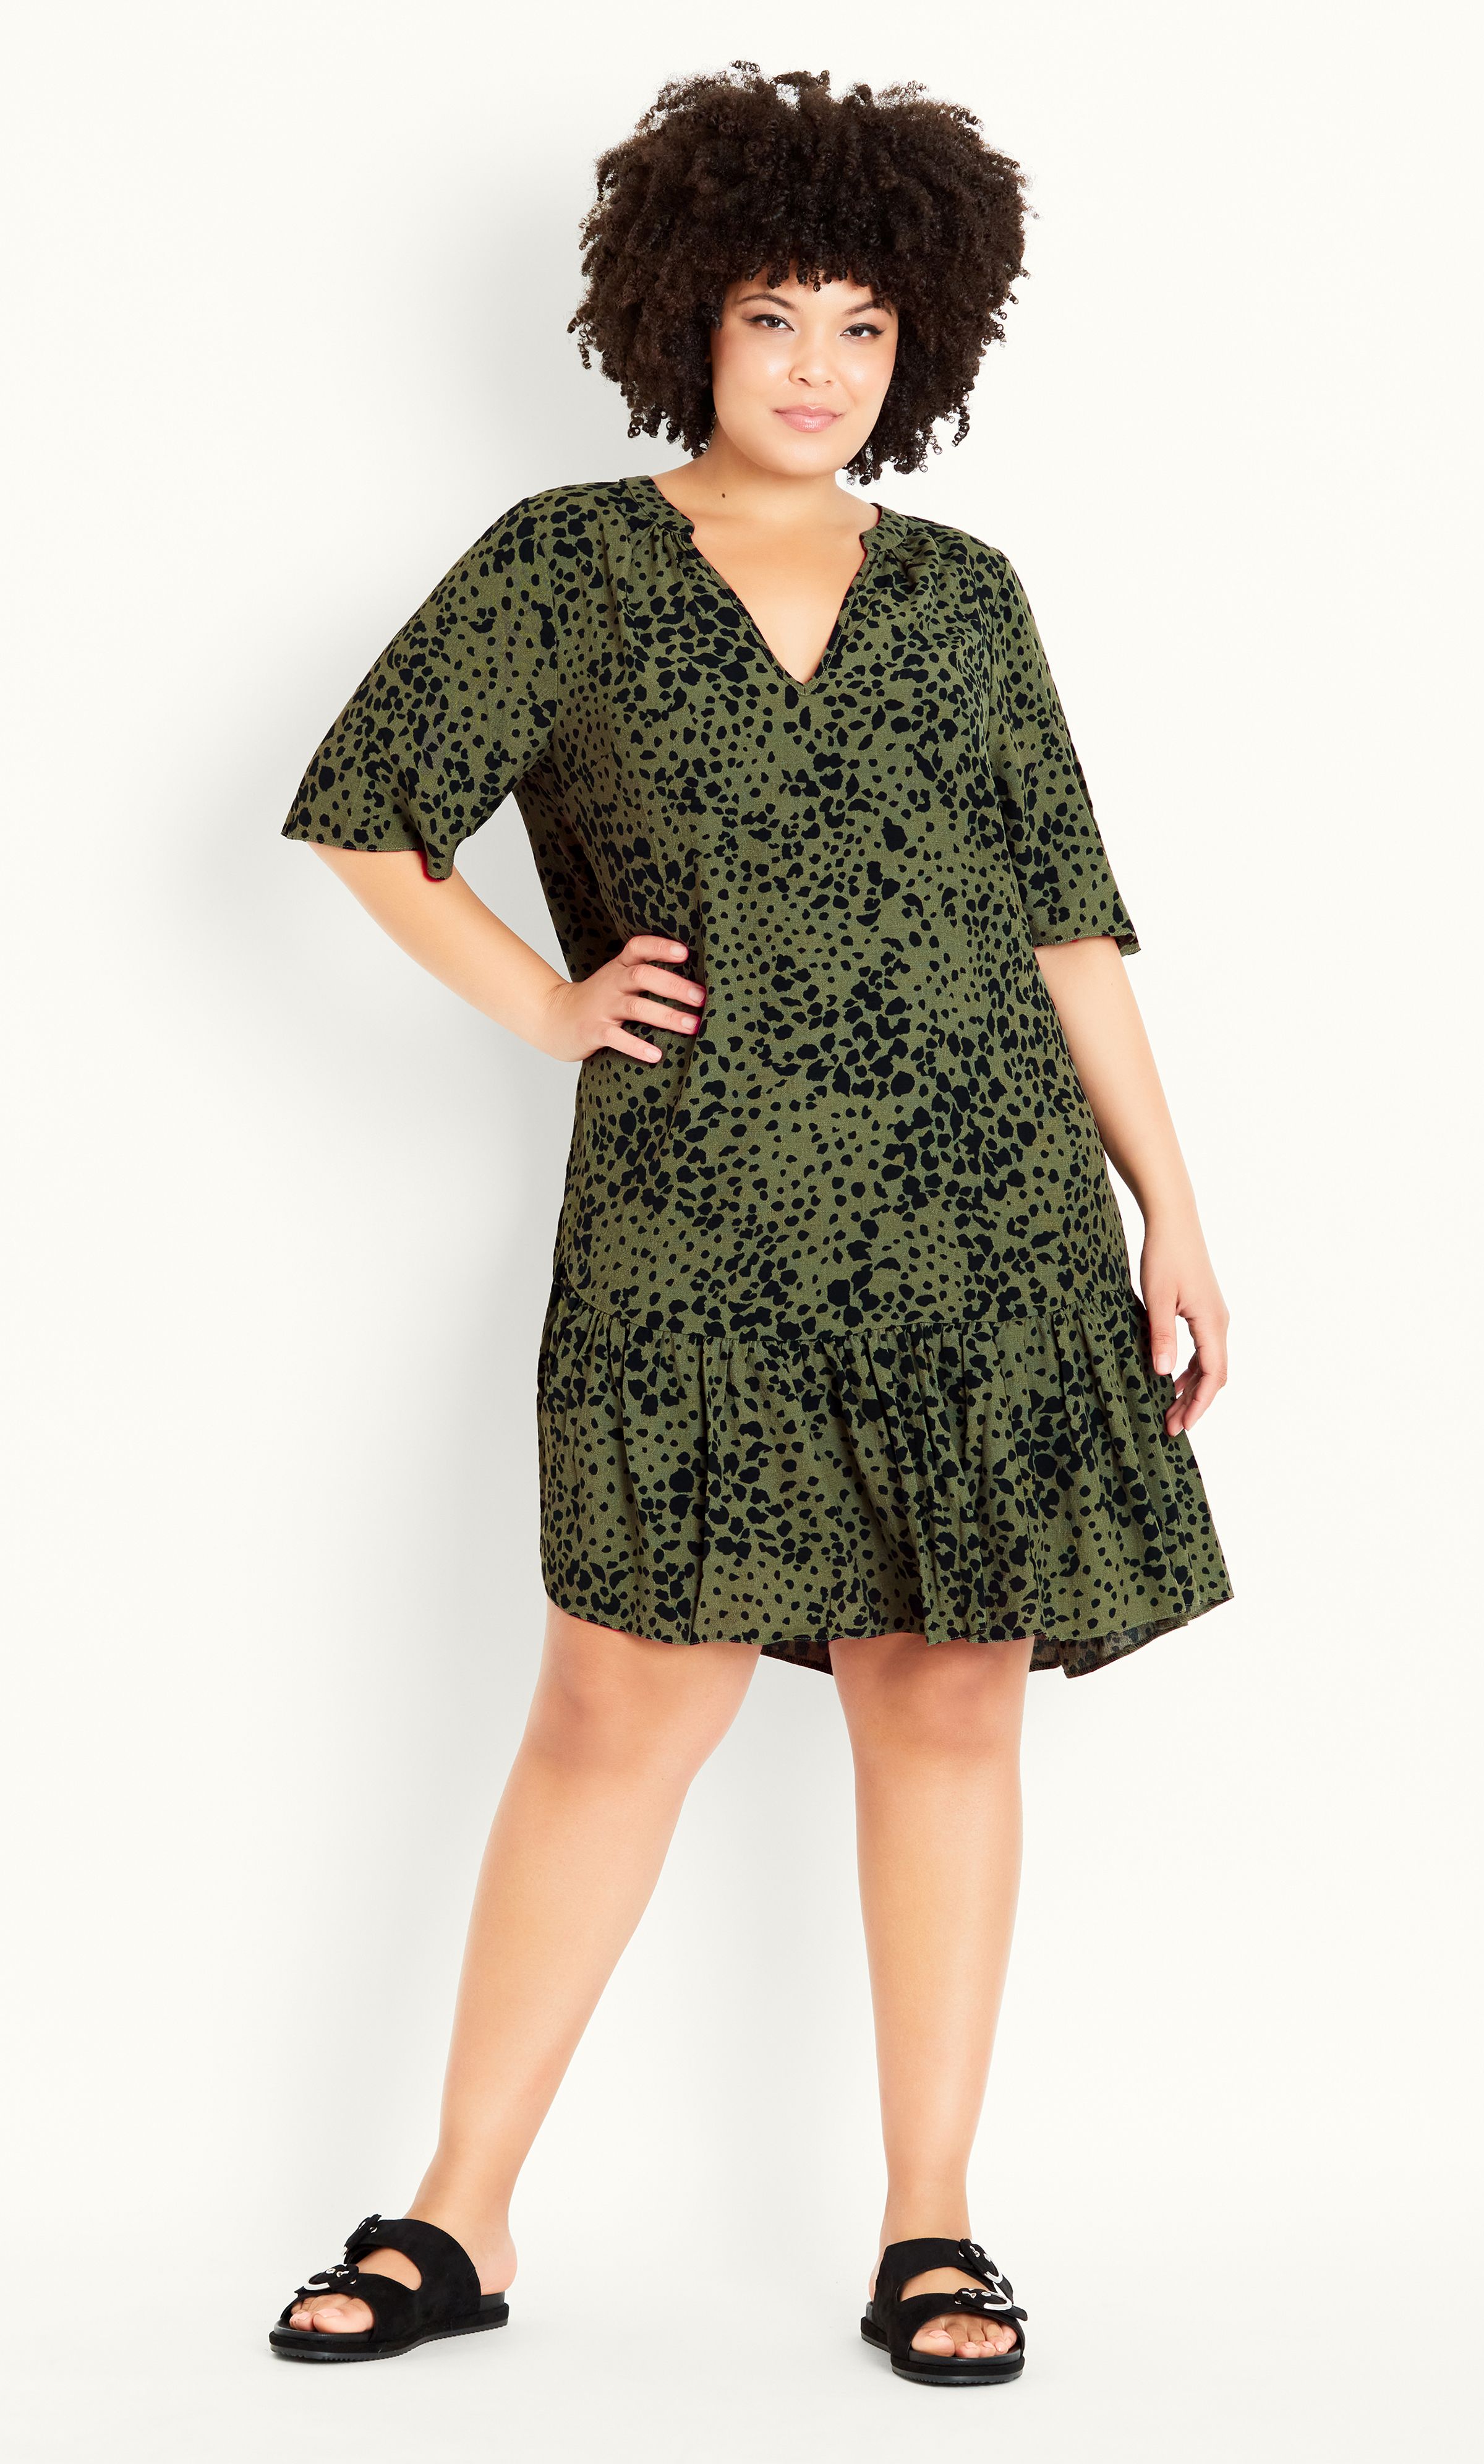 Bring a touch of fun-loving print to your wardrobe with our breezy Animal Dress. Perfect for a sun-soaked summer day, this dress offers a notched V-neckline, short sleeves and lightweight fabrication. Key Features Include: - Notched V-neckline - Elbow-length sleeves - Relaxed fit - Unlined - Lightweight non-stretch fabrication - Pull over style - Frilled hemline Team with woven slides and a sleek waist belt for shape.